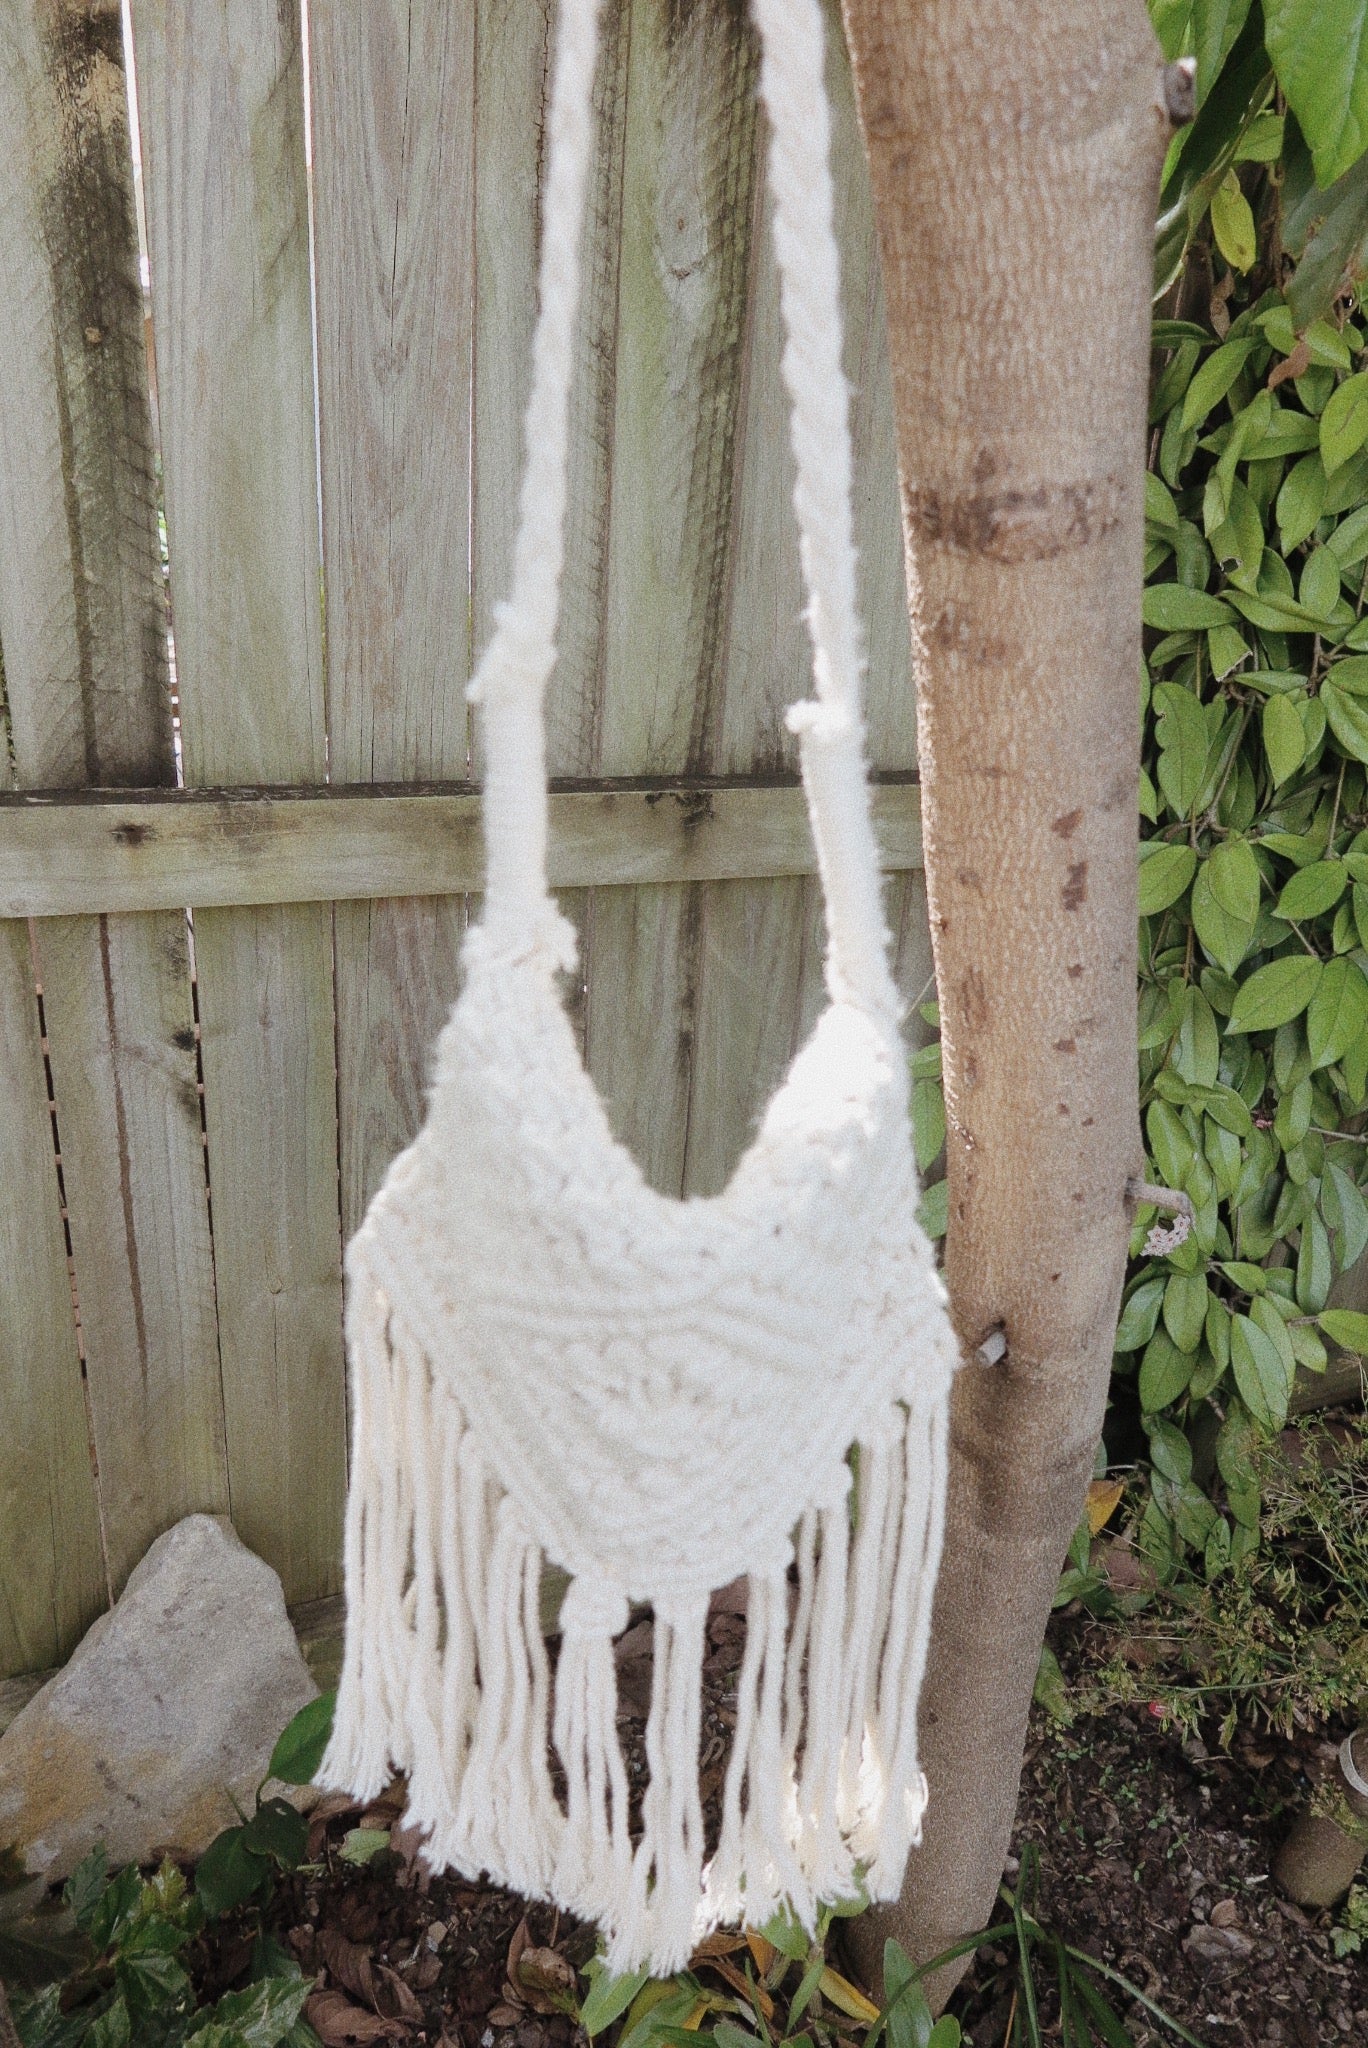 Small Side Bag - Macrame Knotted